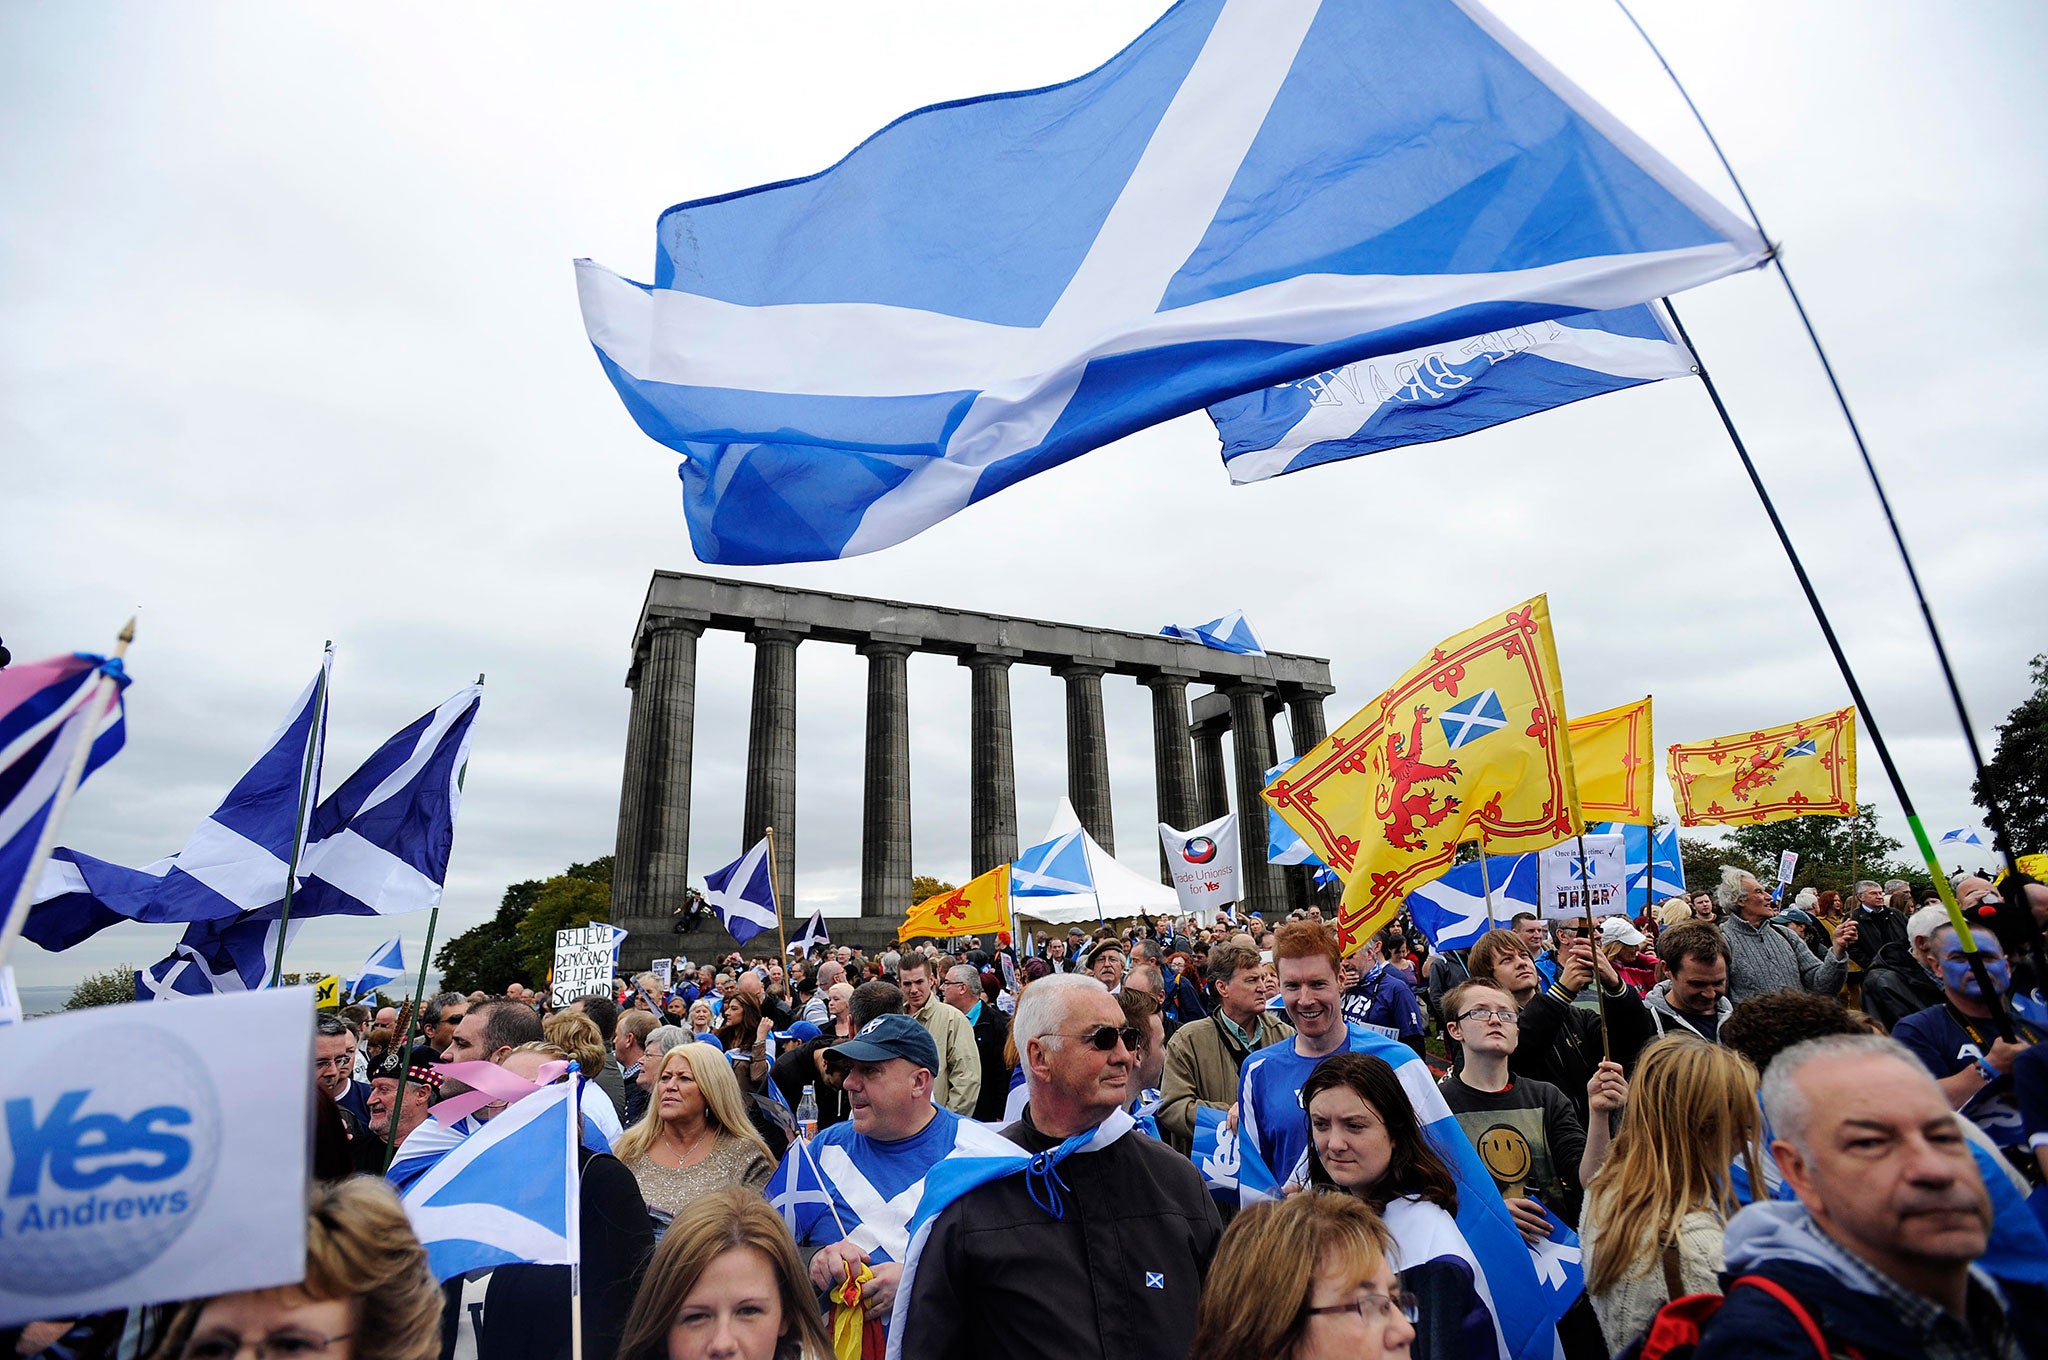 Pro-independence supporters wave the Saltire as they gather in Edinburgh on 21 September 2013